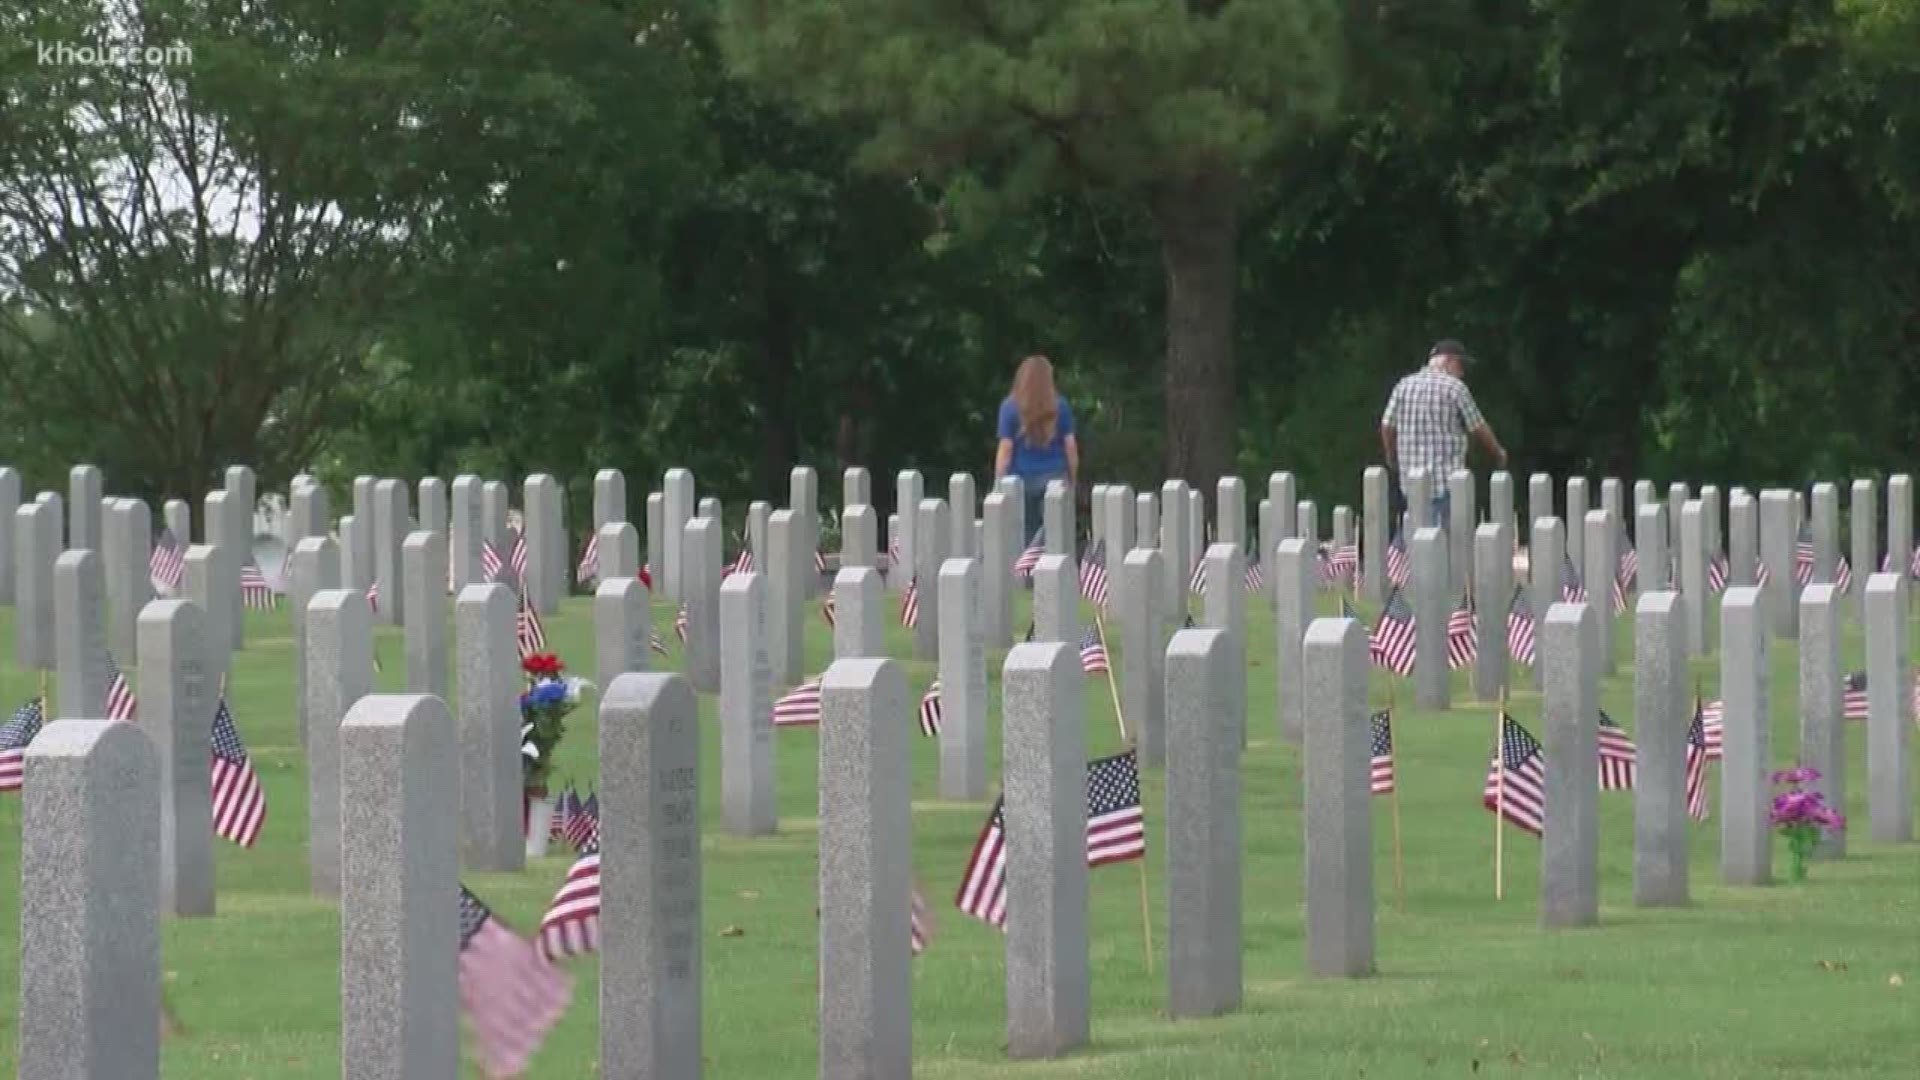 Families gathered at the Houston National Cemetery to honor fallen heroes Sunday ahead of Memorial Day.